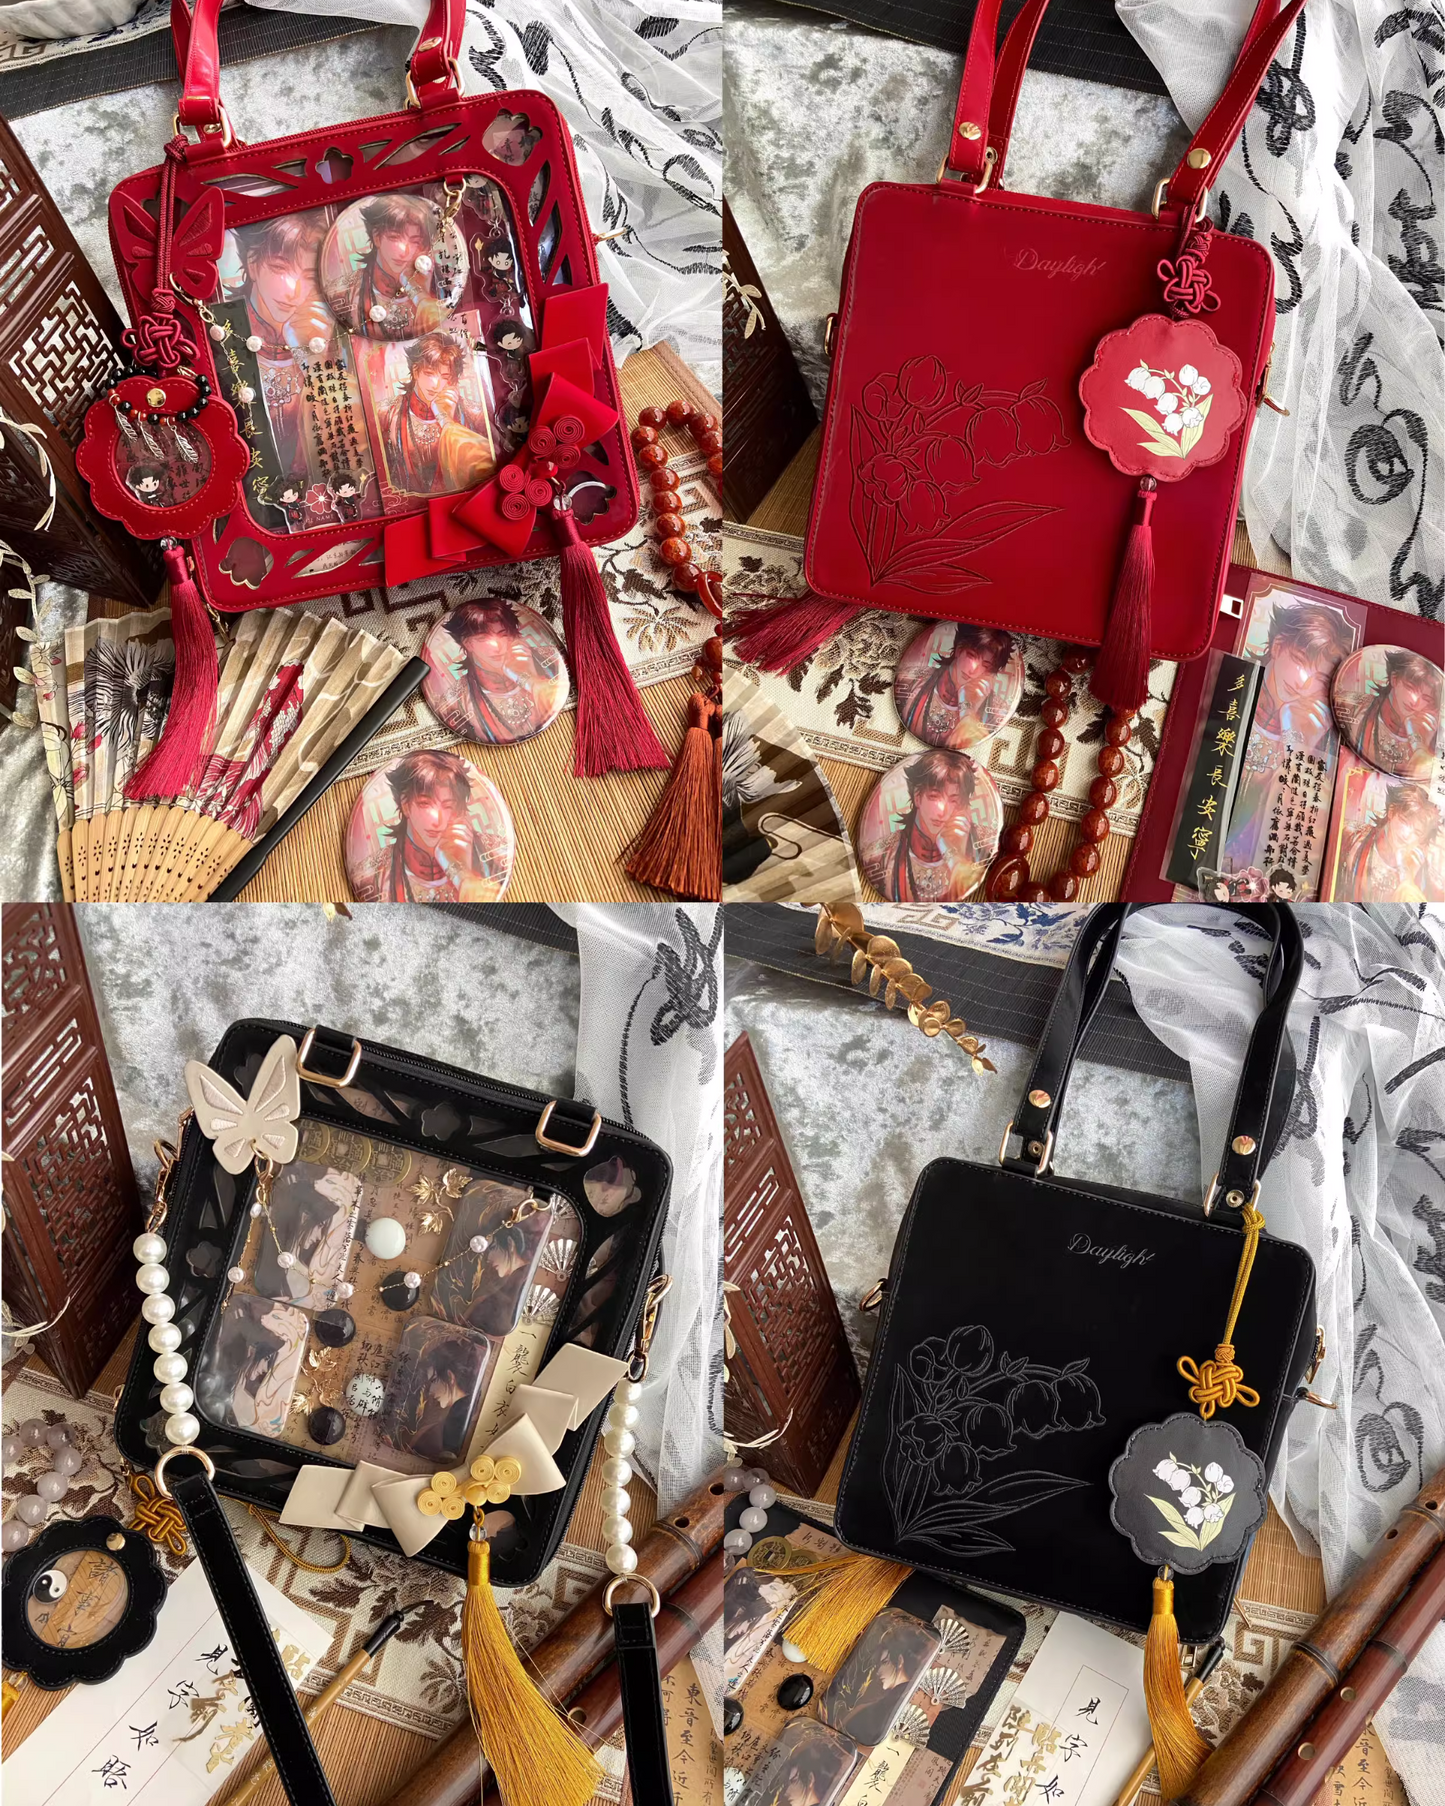 [Partial pre-order sale] Chinese style Suzuran Ita bag in 6 colors